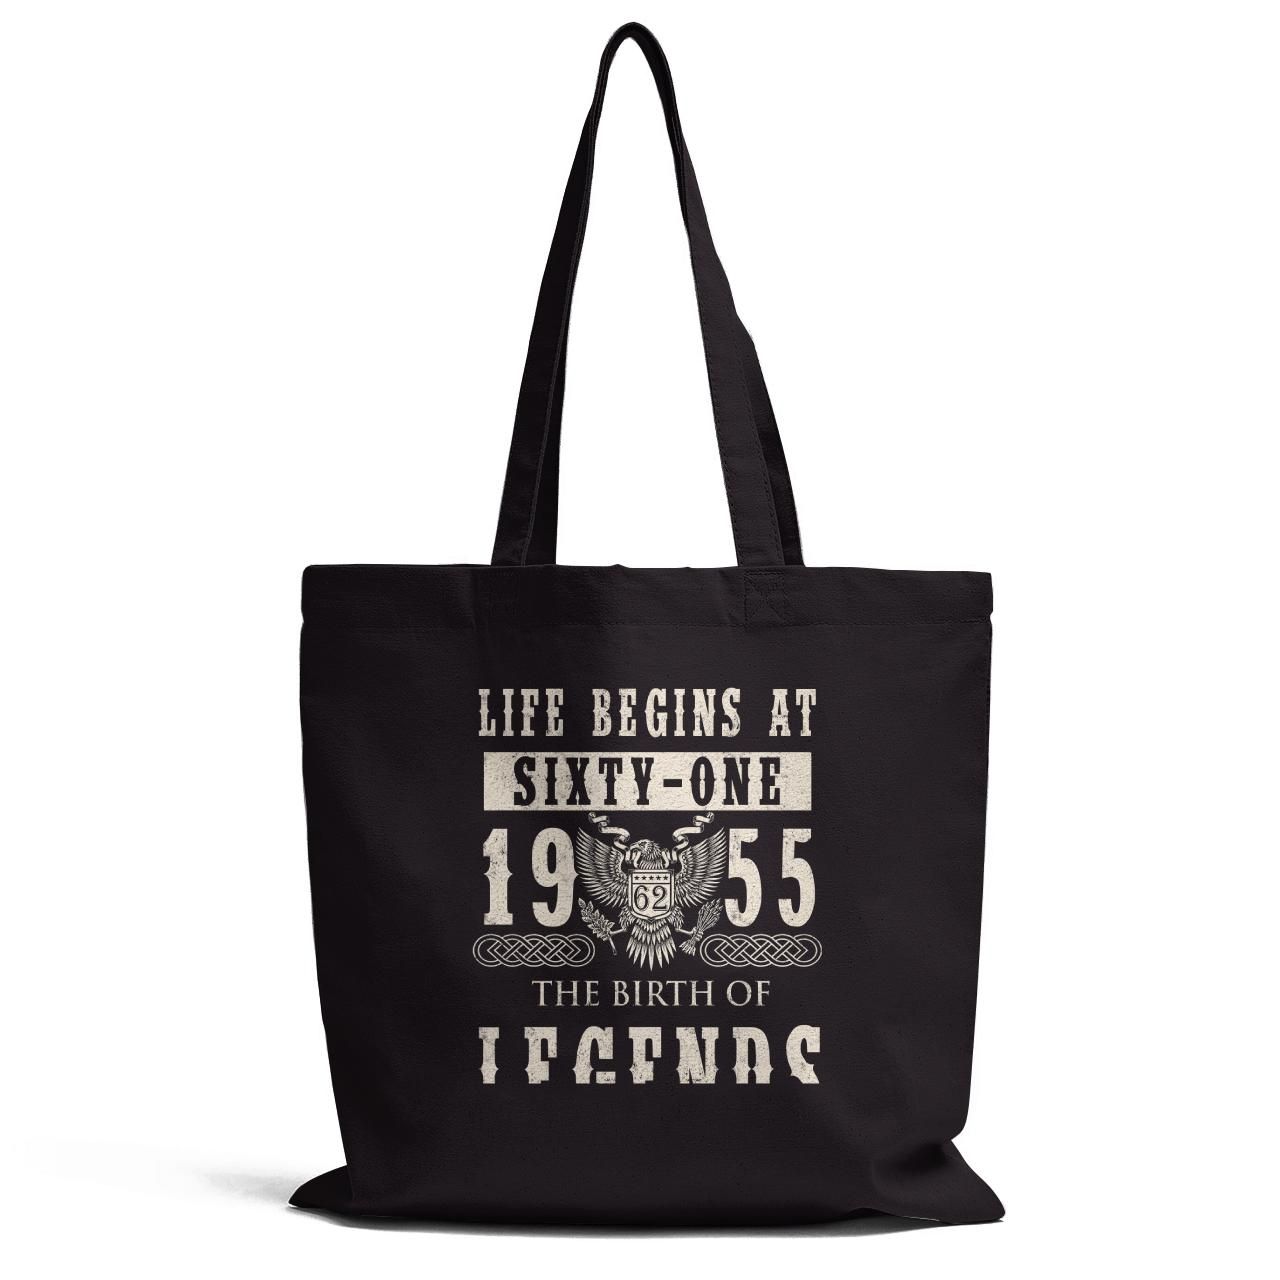 Life Begins At Sixty One 1955 Tote Bag